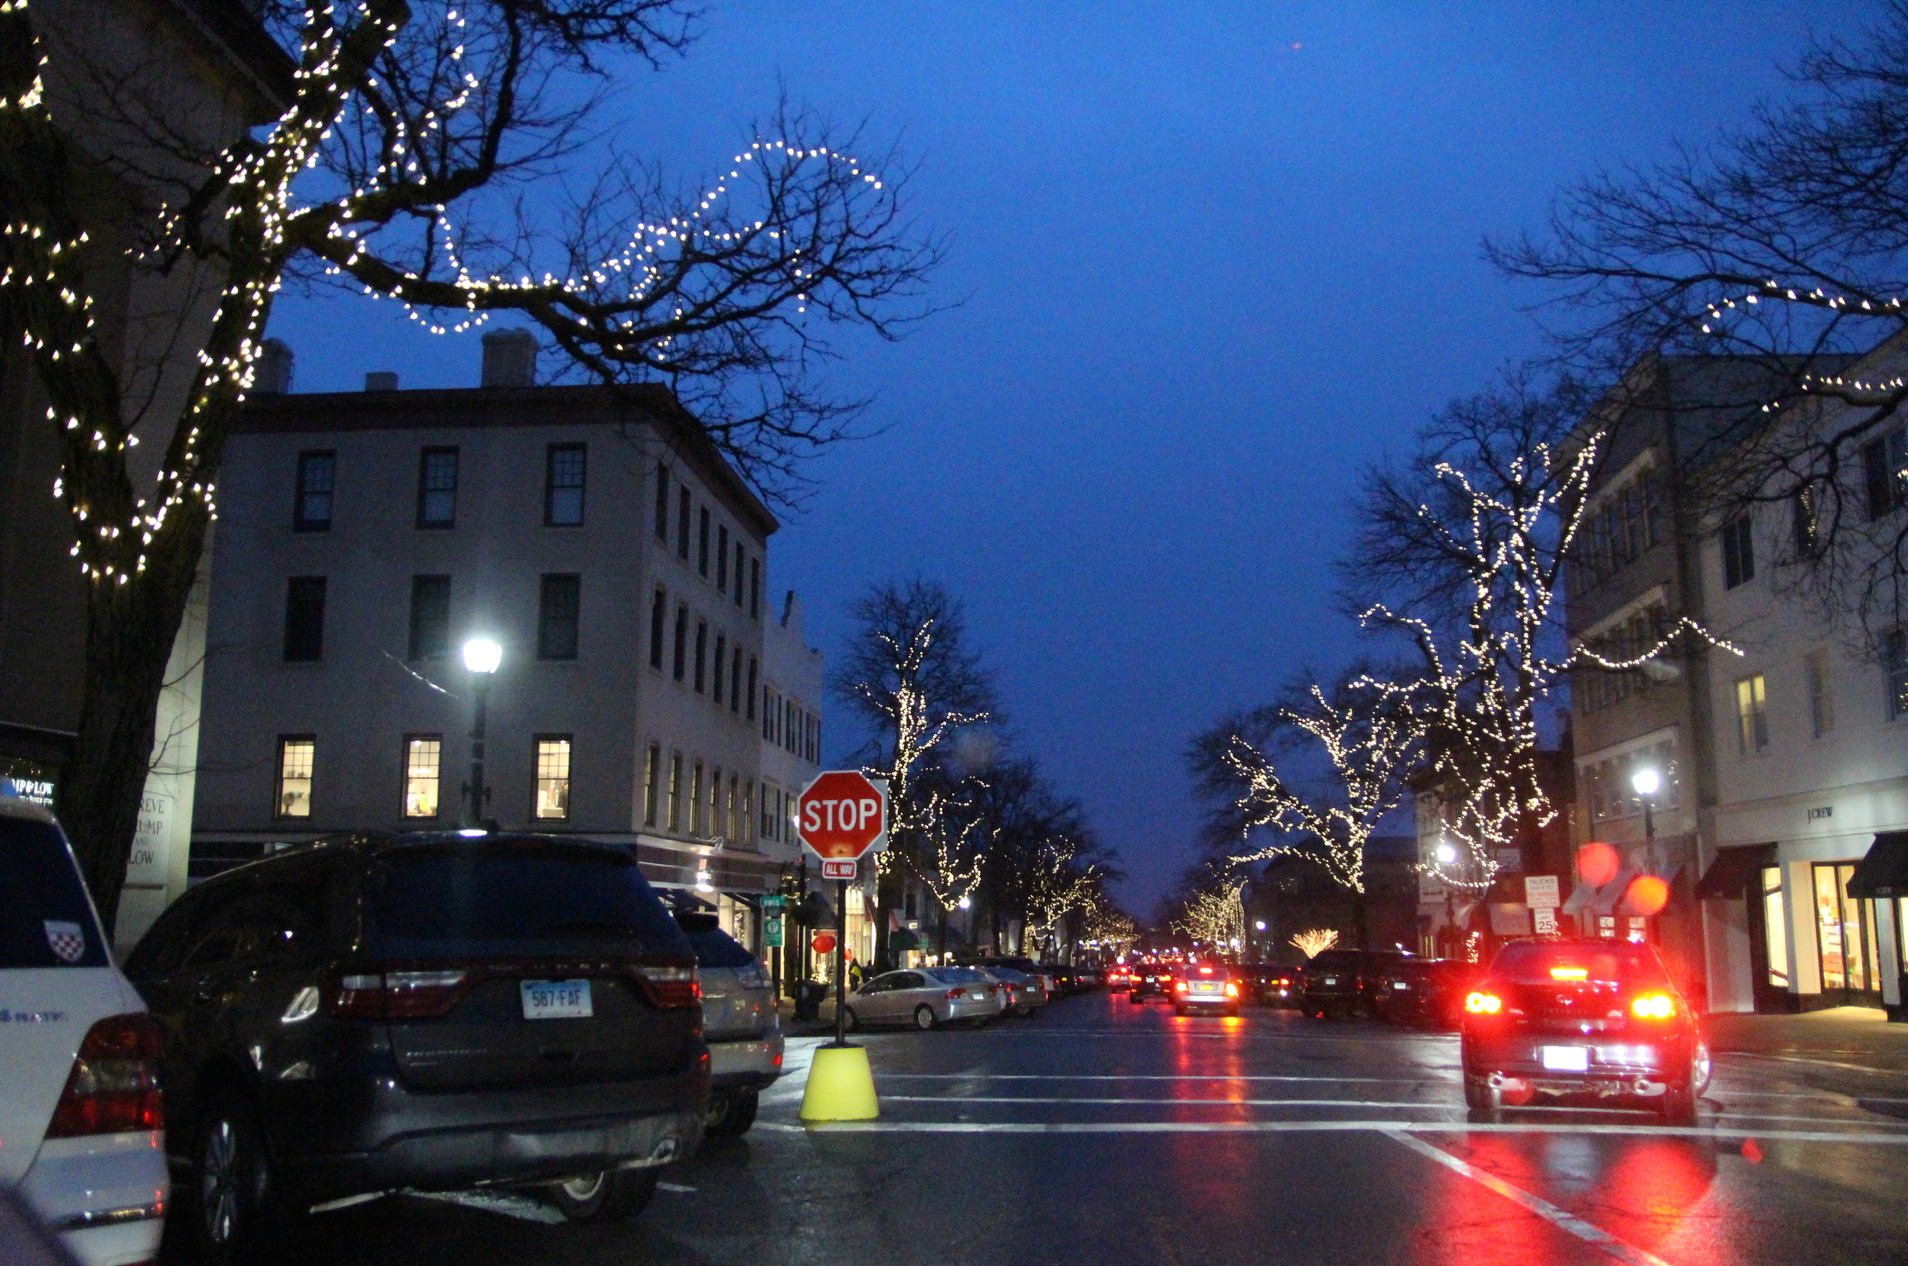 Despite the fog and rain, seasonal lights brightened up the task of last minute shopping on Greenwich Avenue. Dec 23 Photo: Leslie Yager